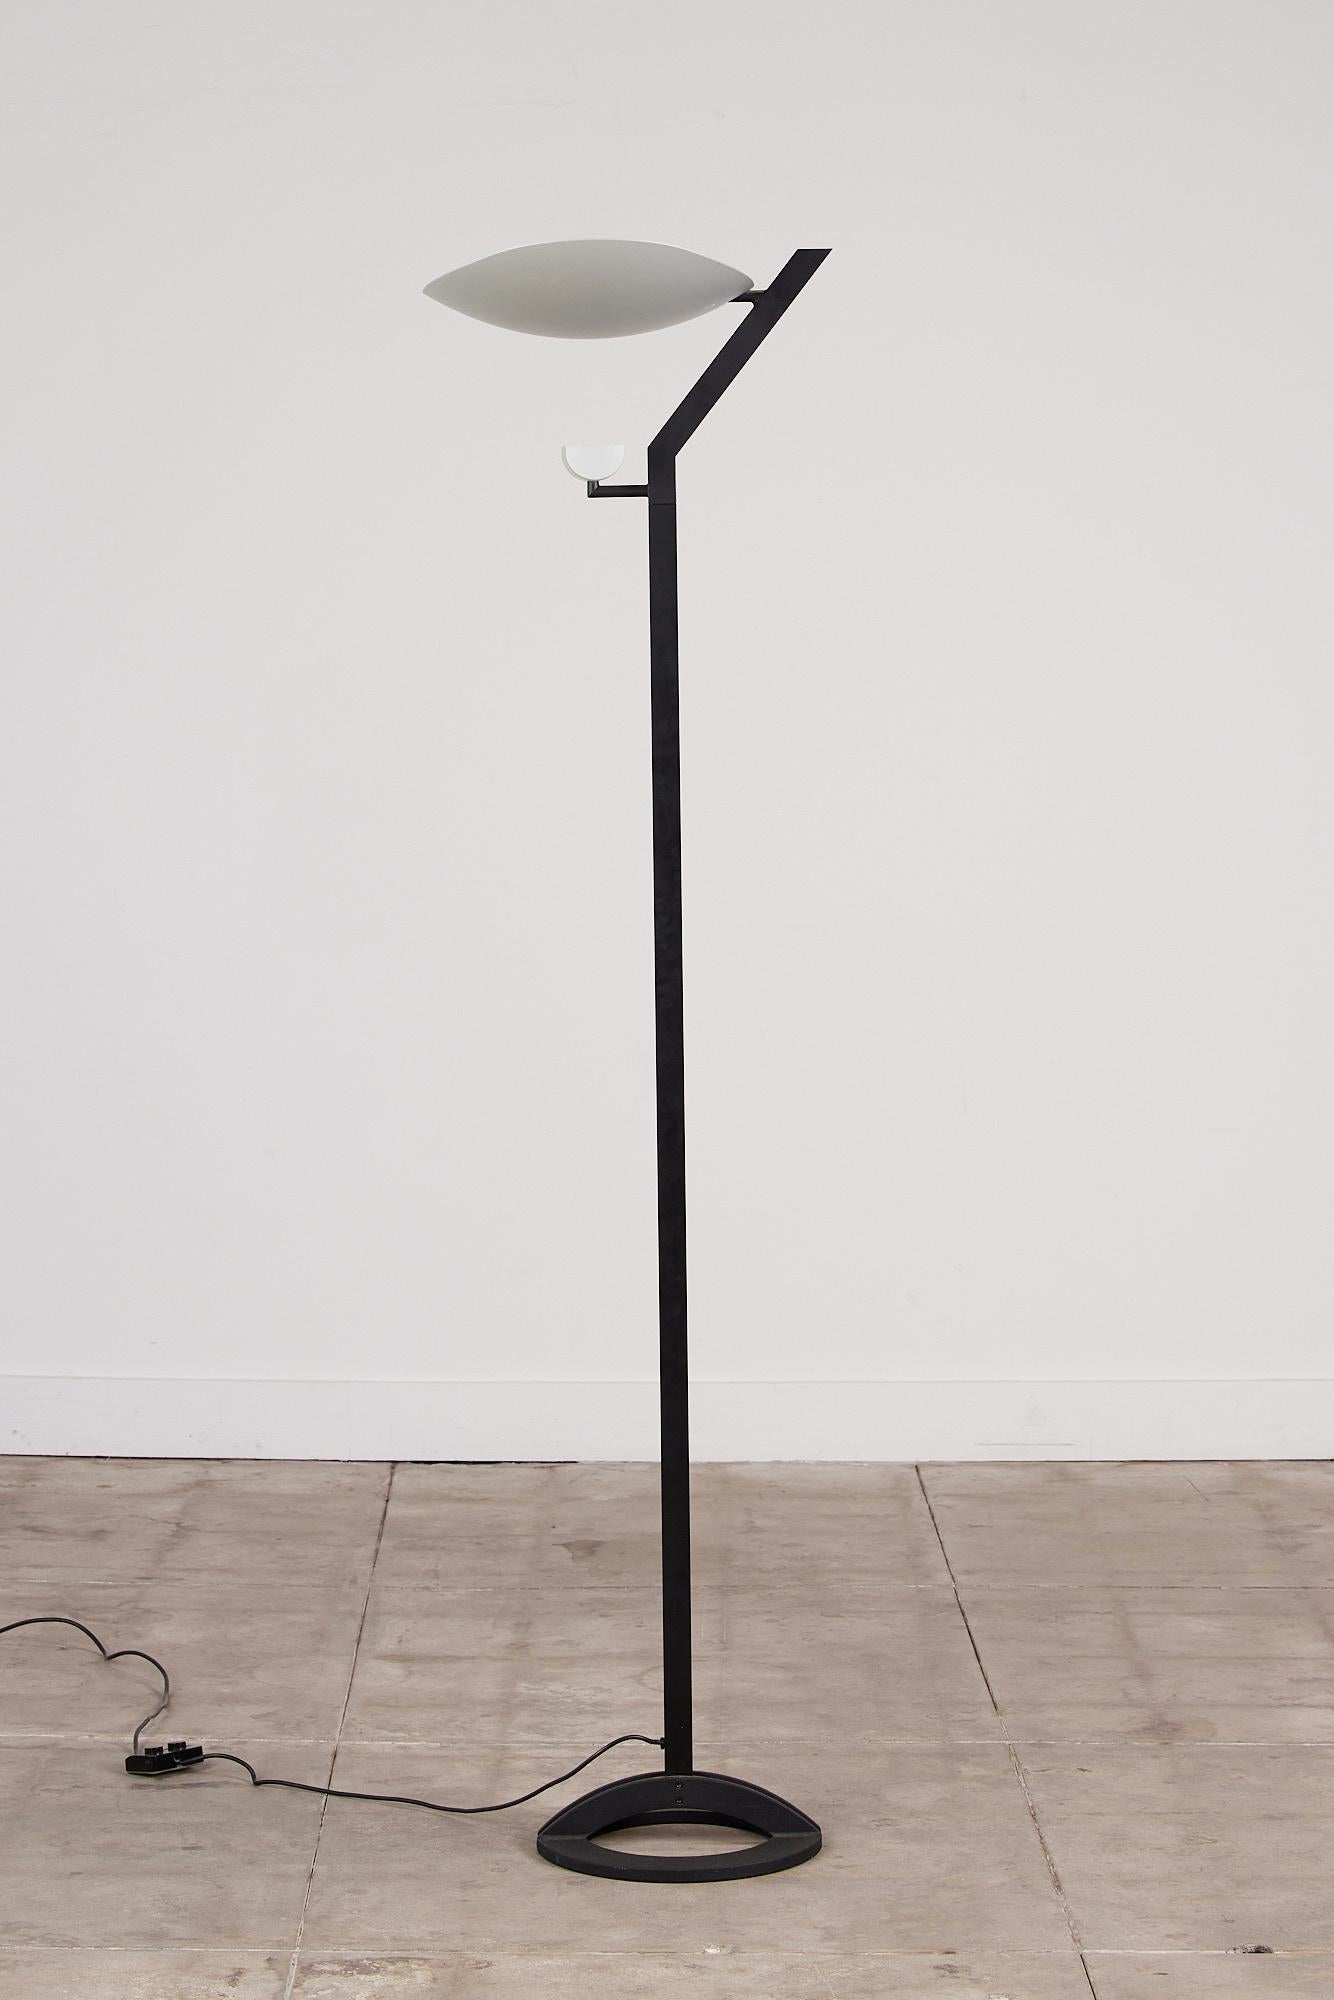 Ernesto Gismondi “Zen” floor lamp for Artemide, Italy, c.1980s. The anodized aluminum lamp features two light sources, one at top that rests in a large cream colored saucer shade and reflects light upward. The second, beneath which reflects light